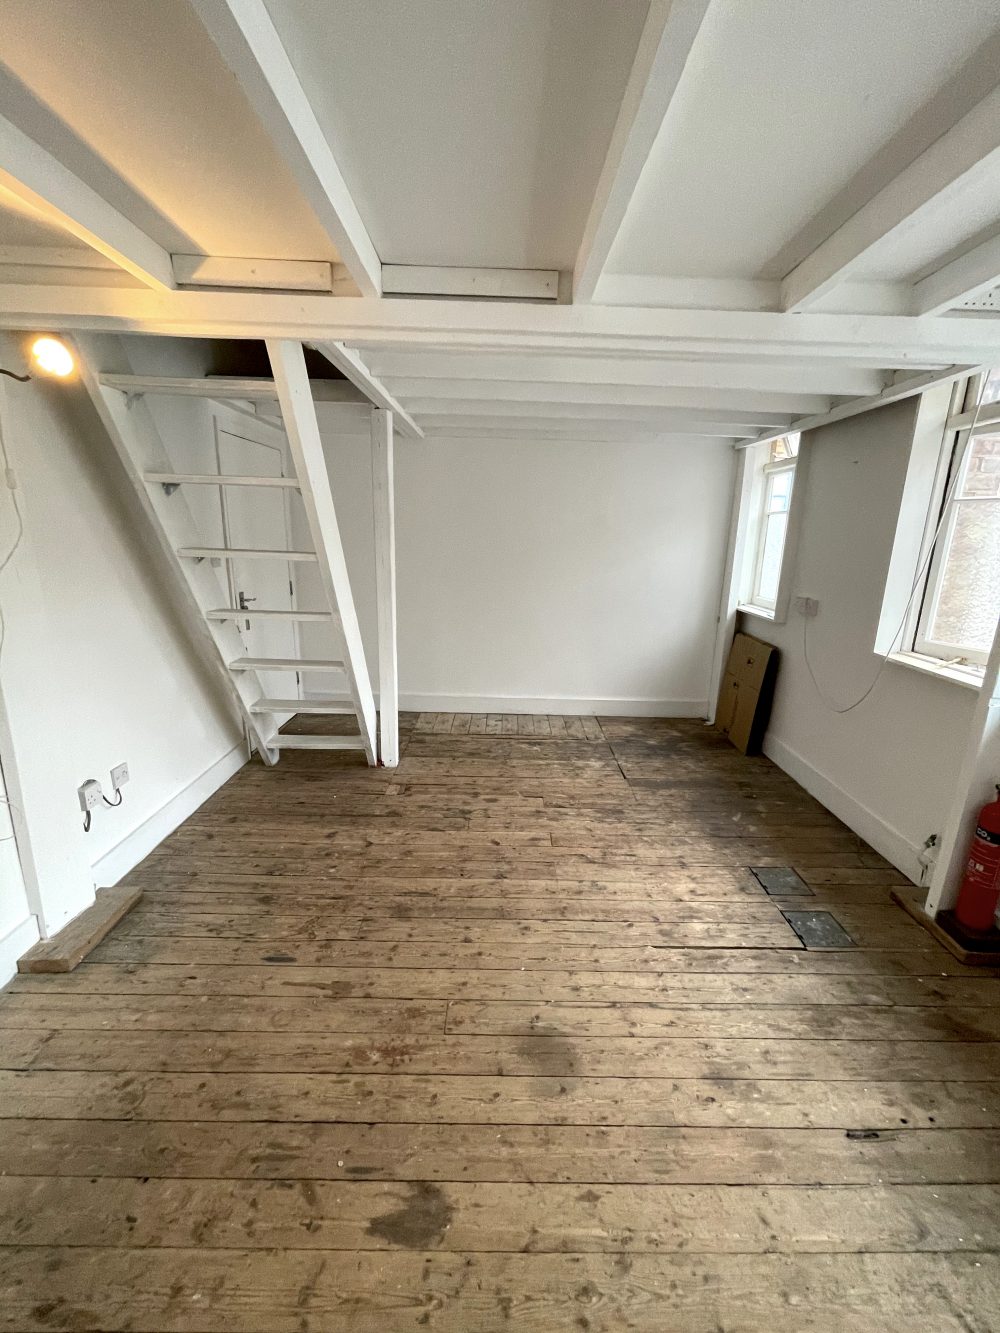 Mezzanine Studio Available to rent in N16 Shelford Place Pic2